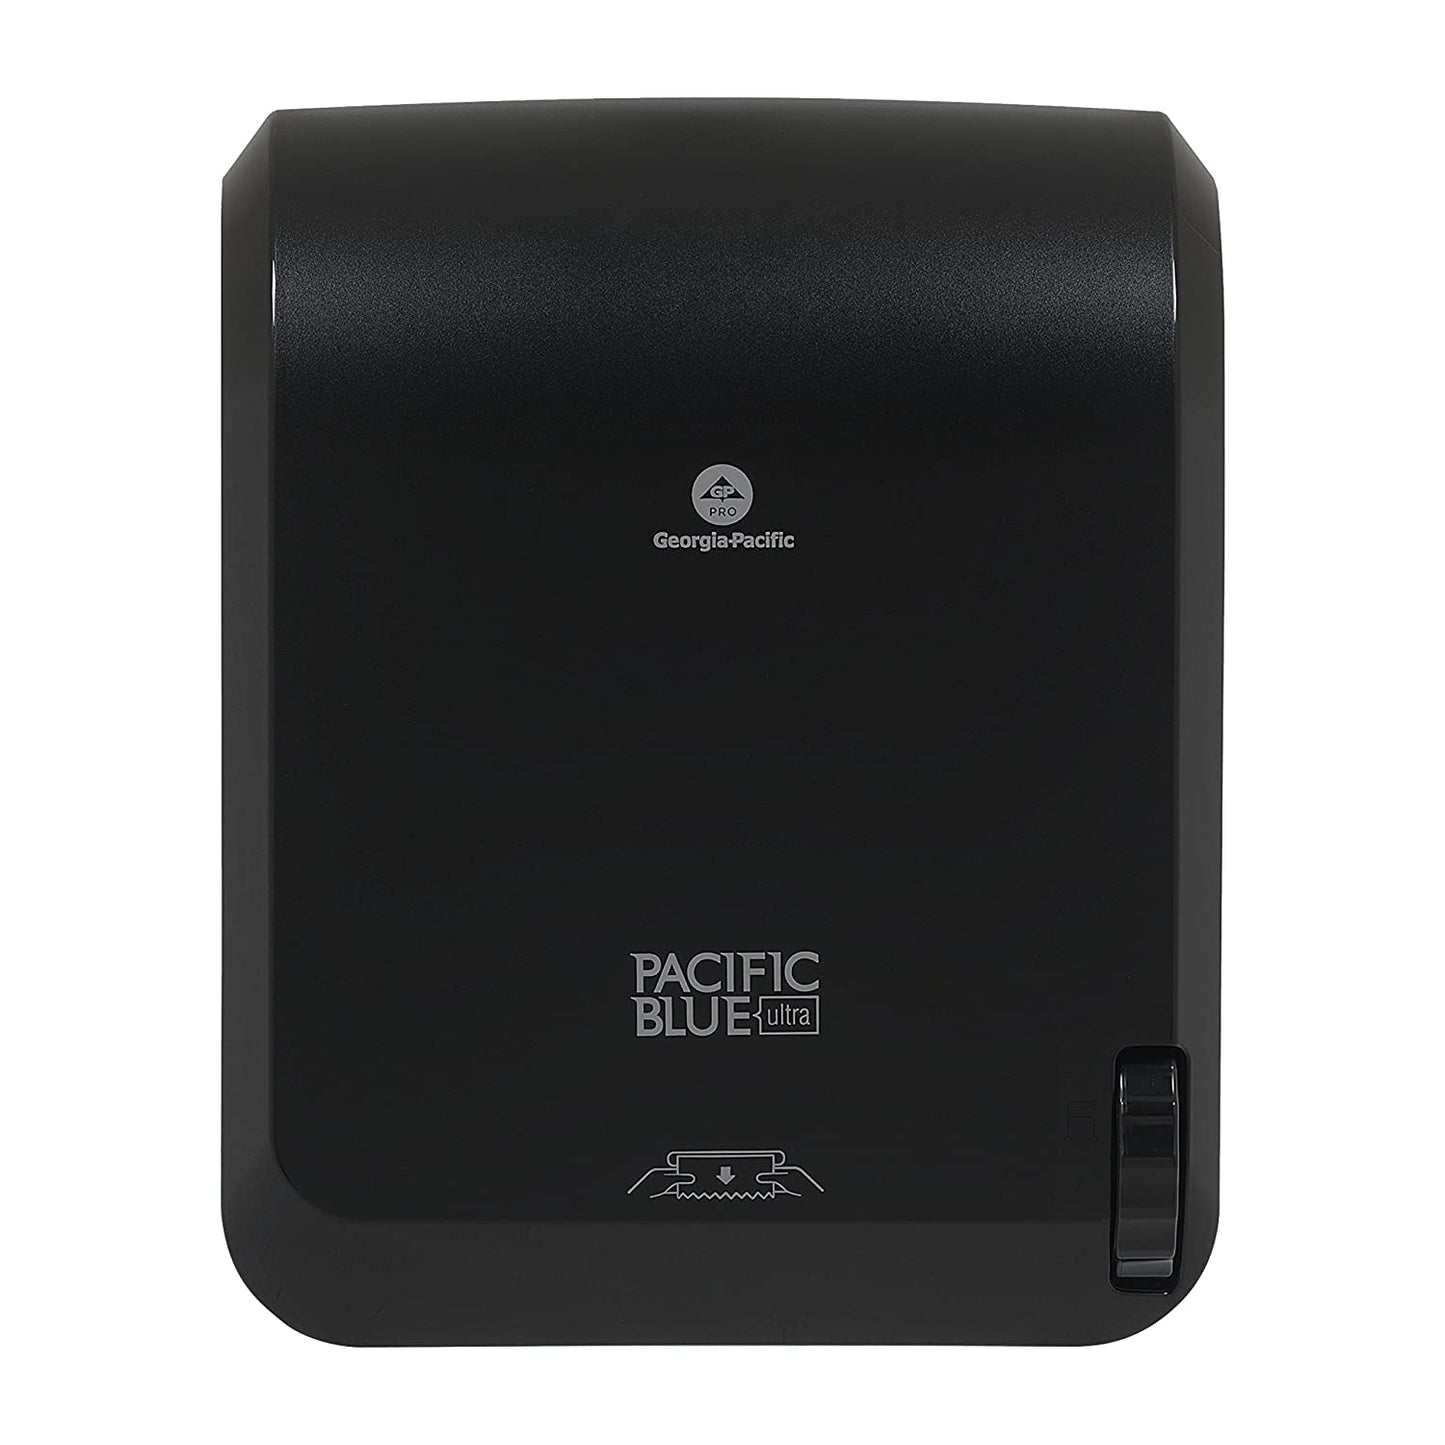 Pacific Blue Ultra 8” High-Capacity Mechanical Touchless Paper Towel Dispenser by GP PRO